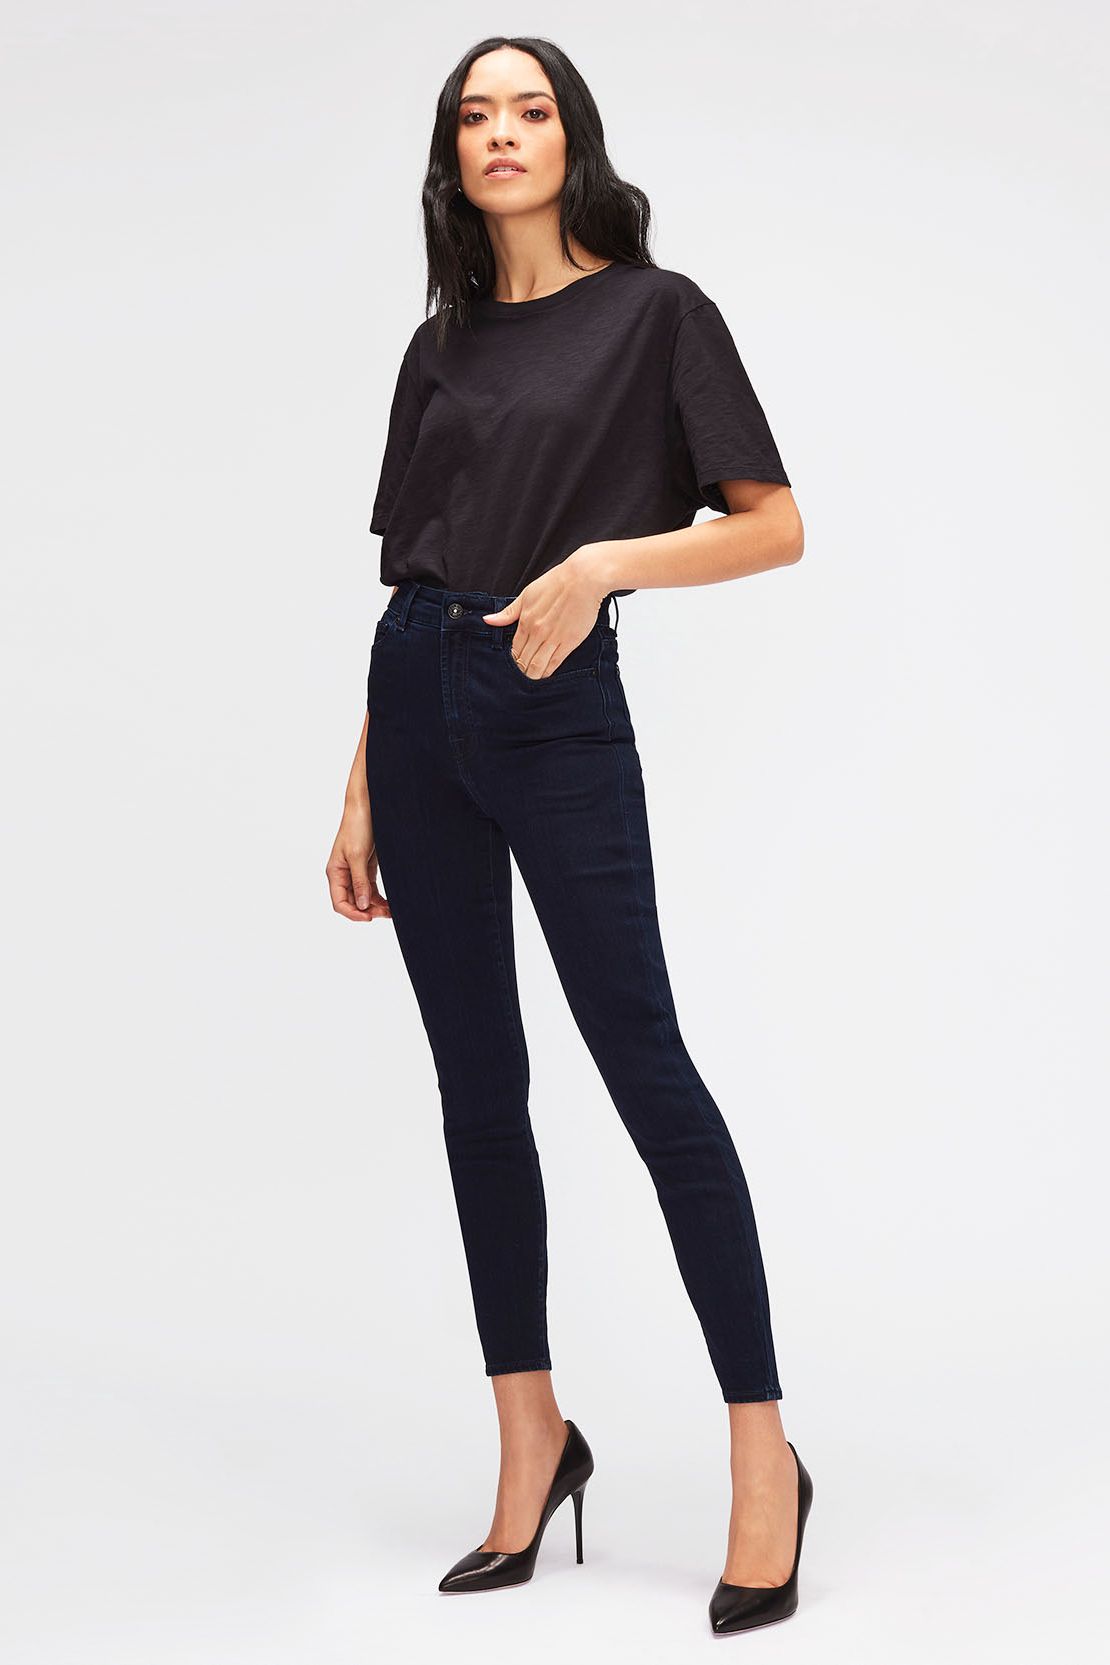 dark indigo (certainty) high rise skinny jeans by 7 for all mankind